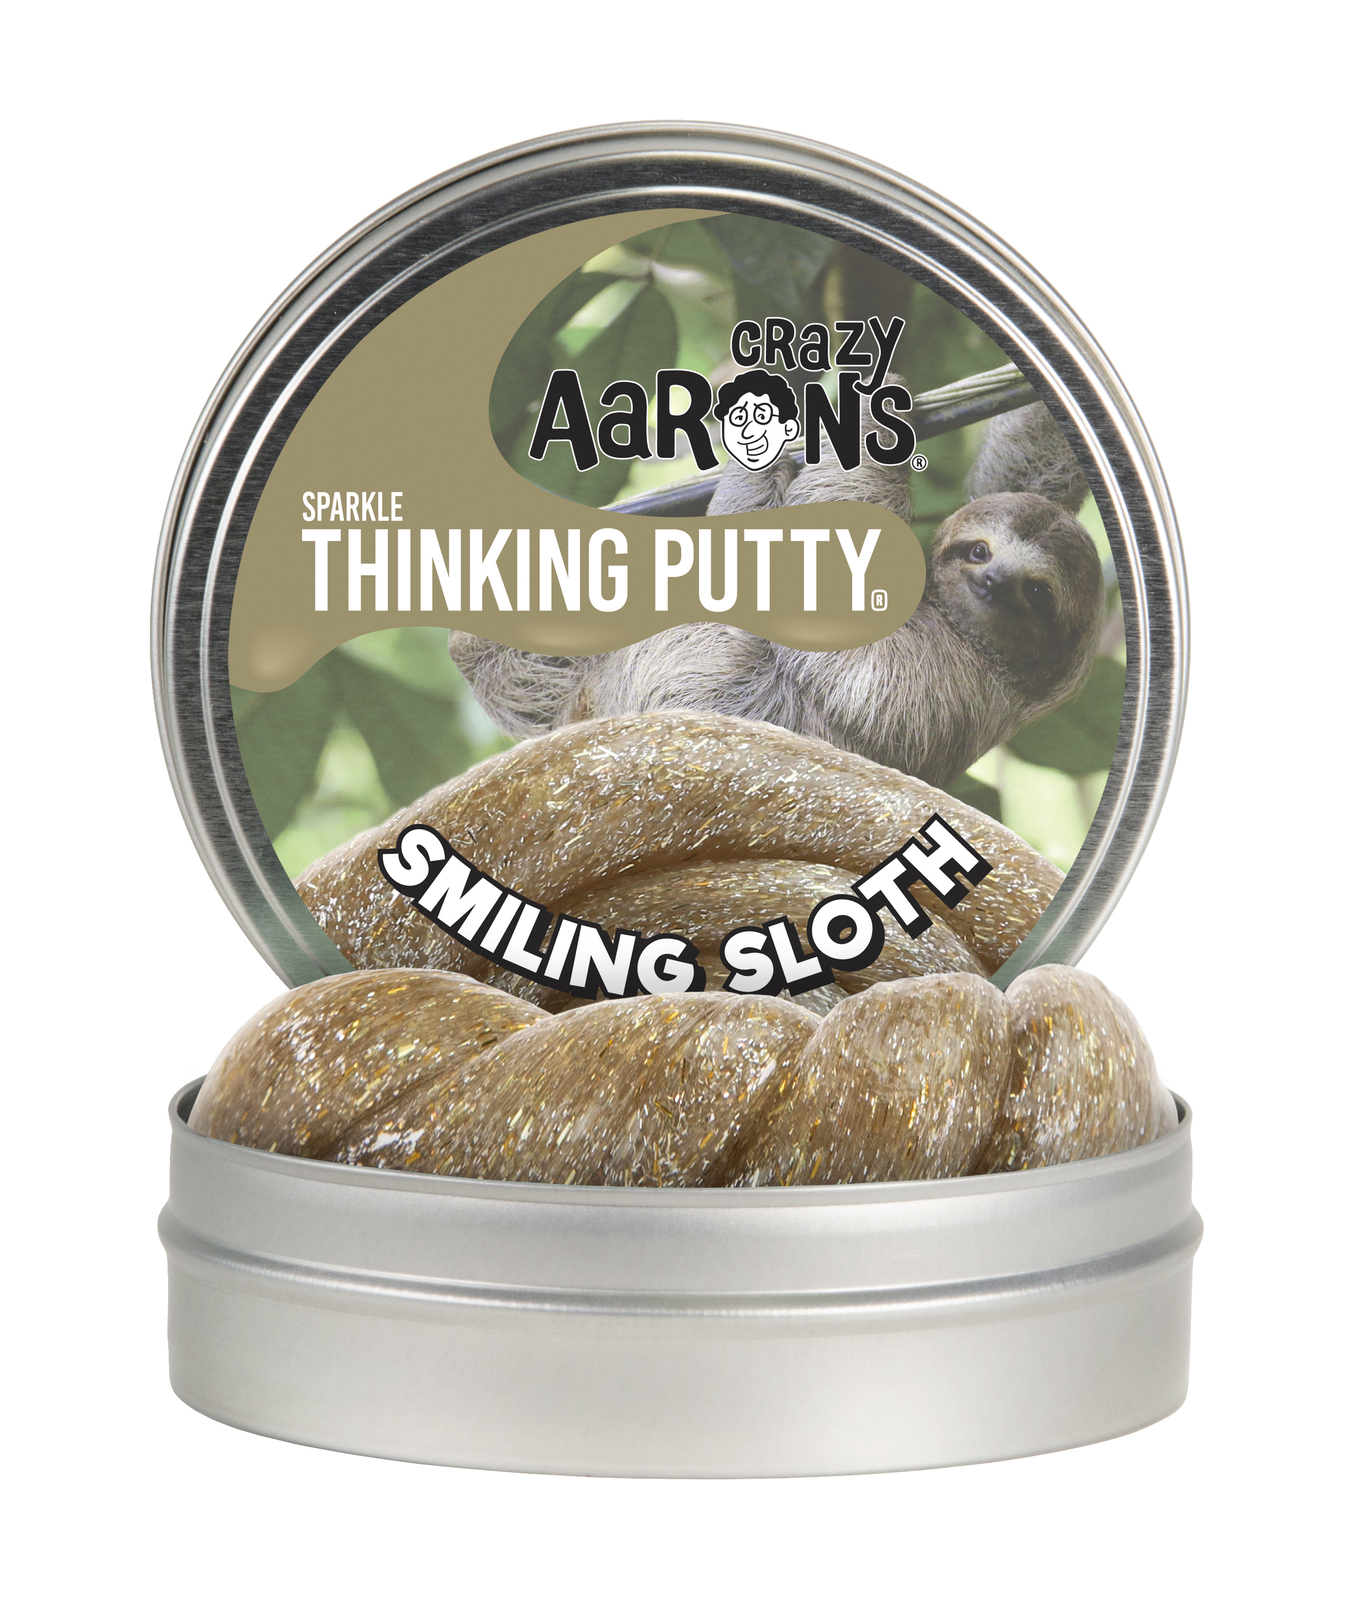 Smiling Sloth Sloths 4" Tin - Thinking Putty Crazy Aarons